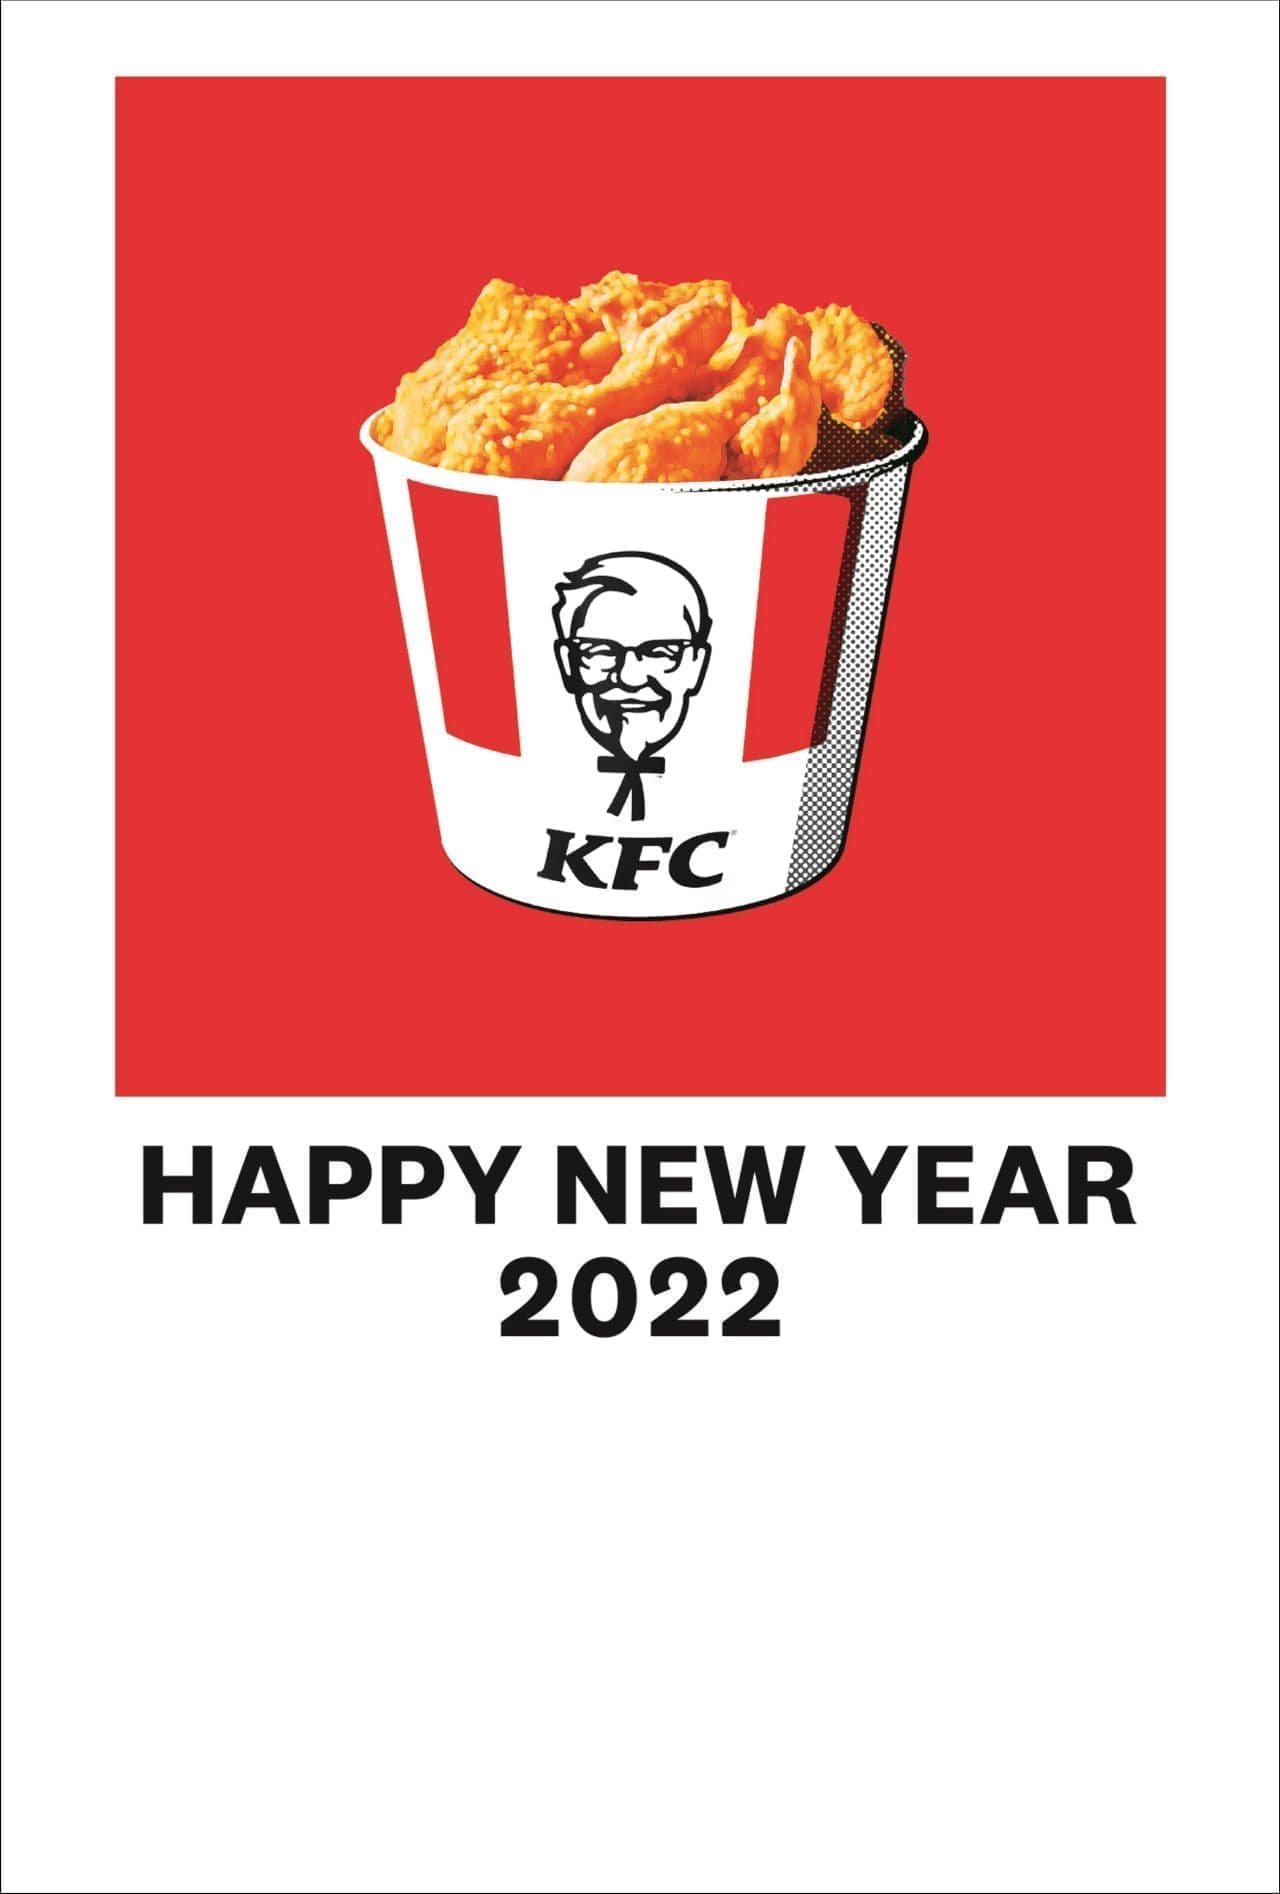 "KFC original New Year's postcard with gift" in collaboration with Kentucky and Japan Post